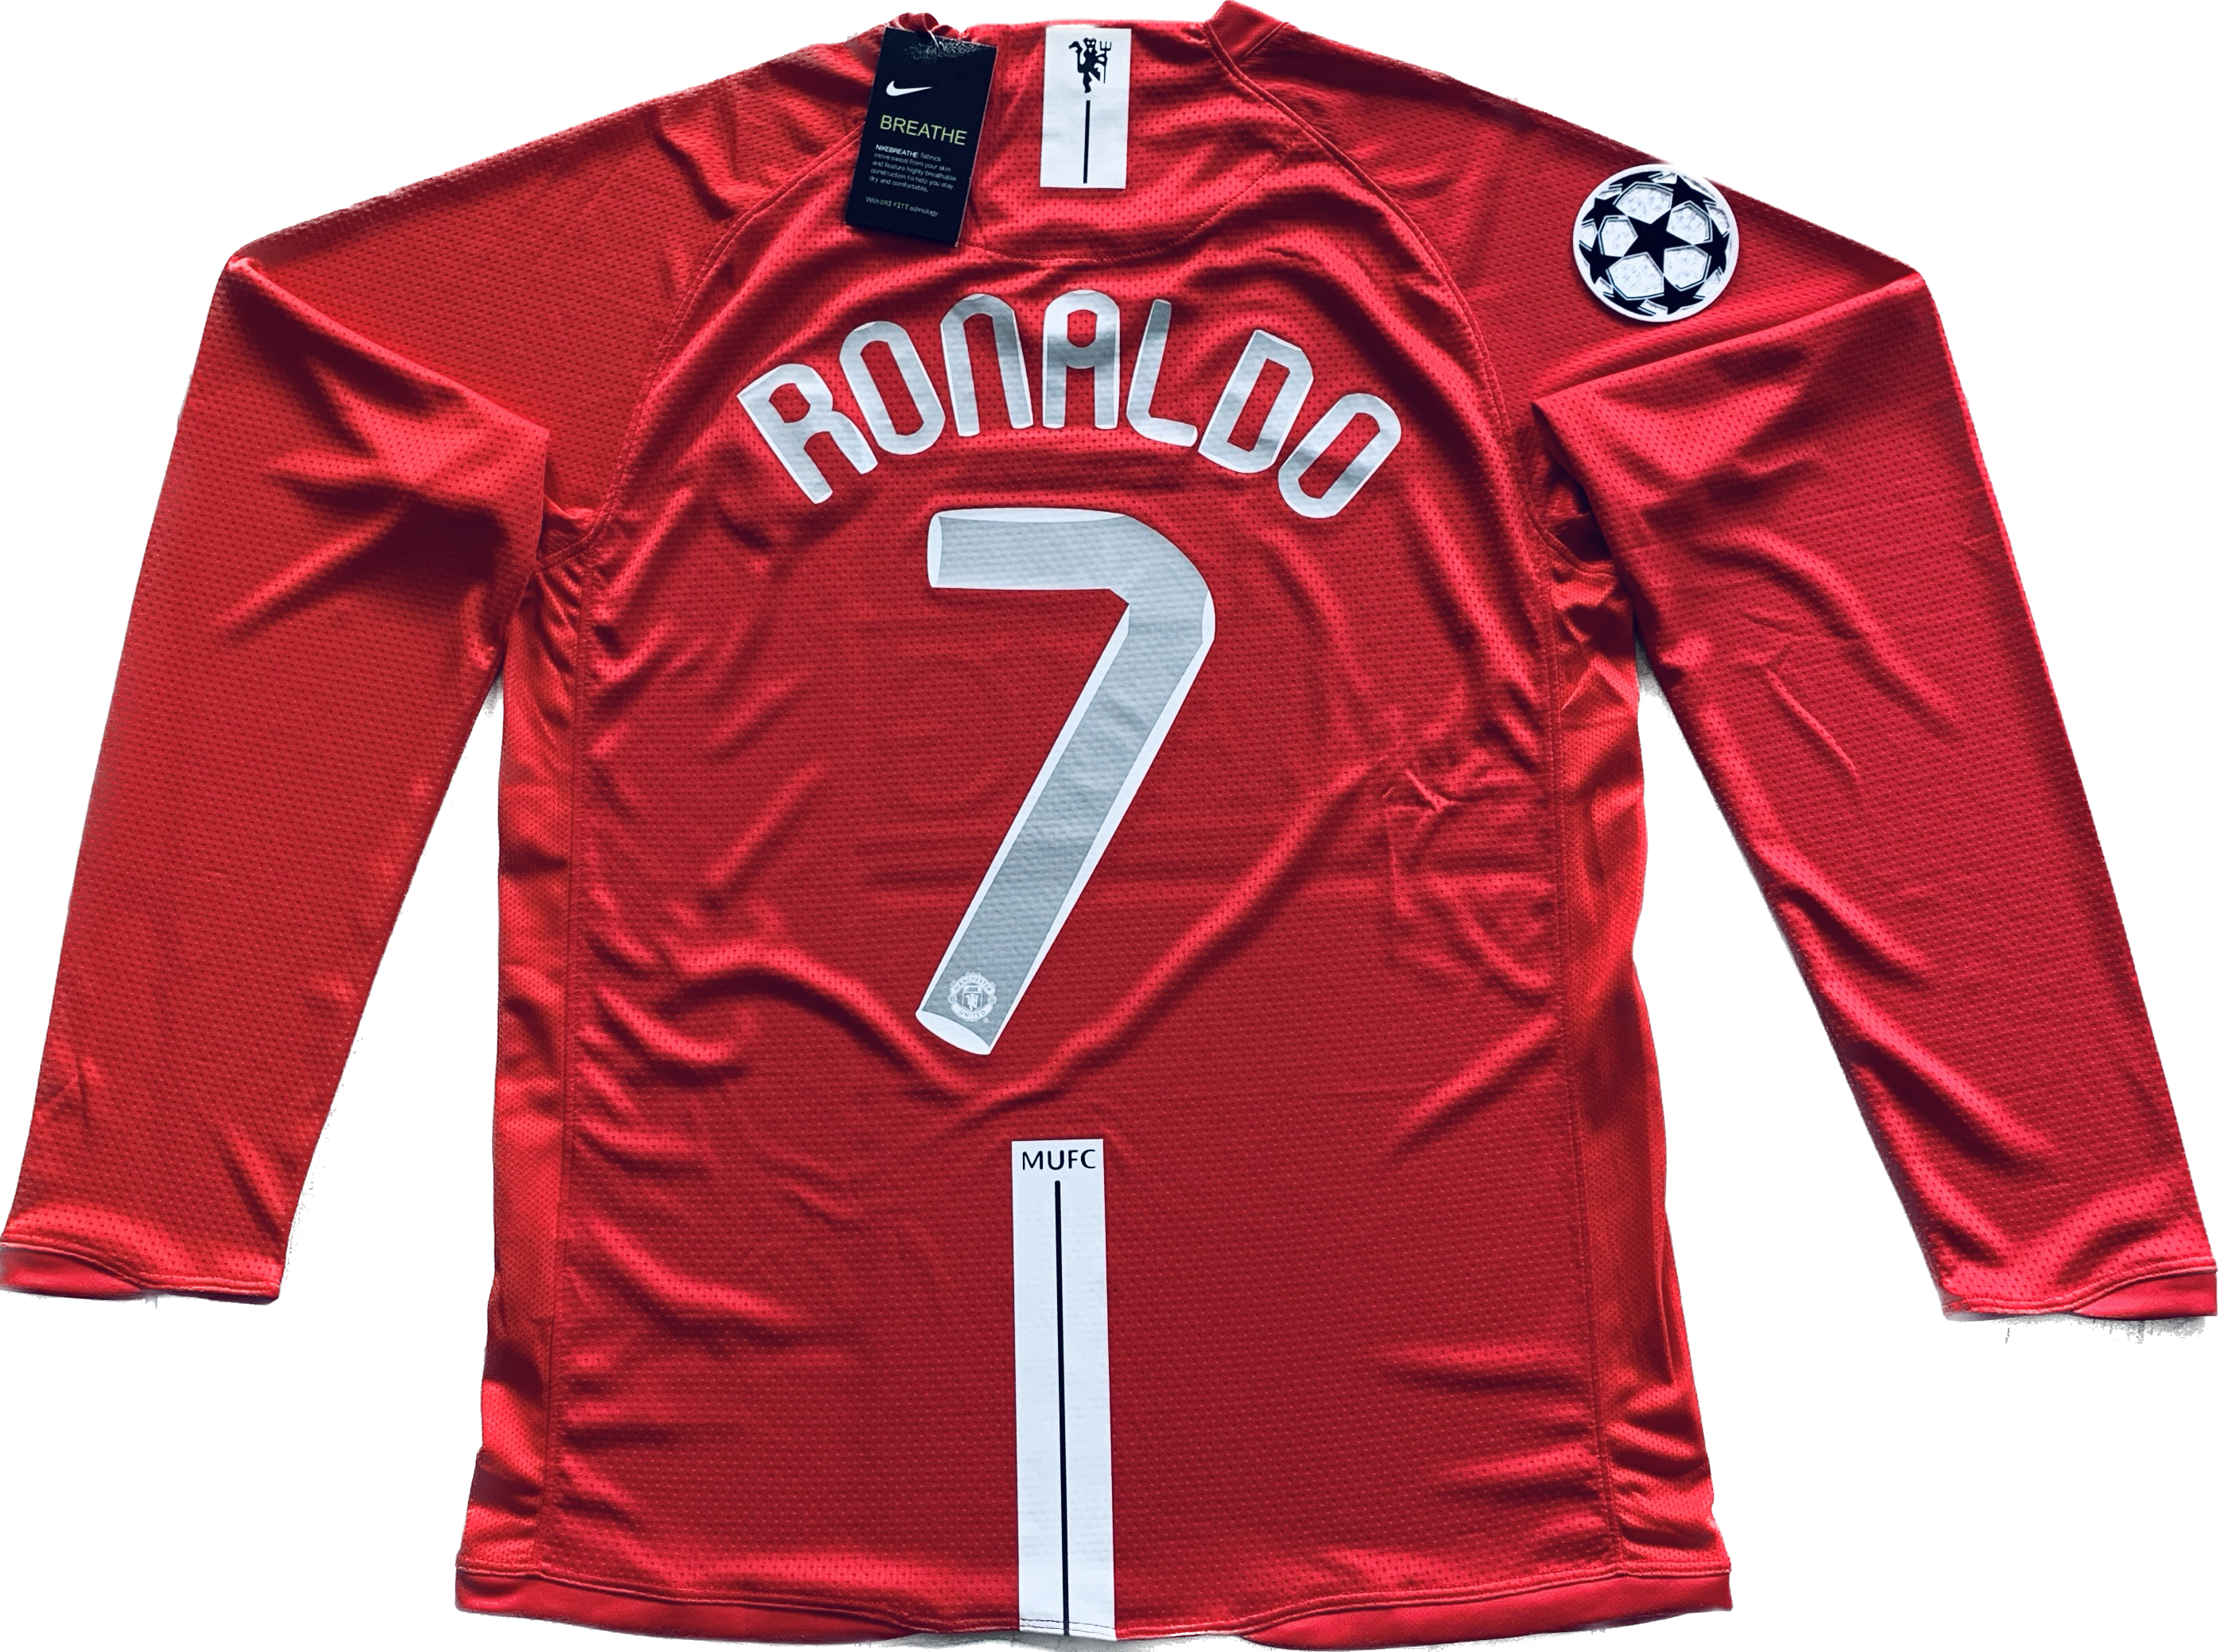 SoccerClearance Ronaldo #7 Retro Final Moscow 2008 Manchester United Men's Soccer Jersey Clearance (Please Look at Description to Select Correct Size)